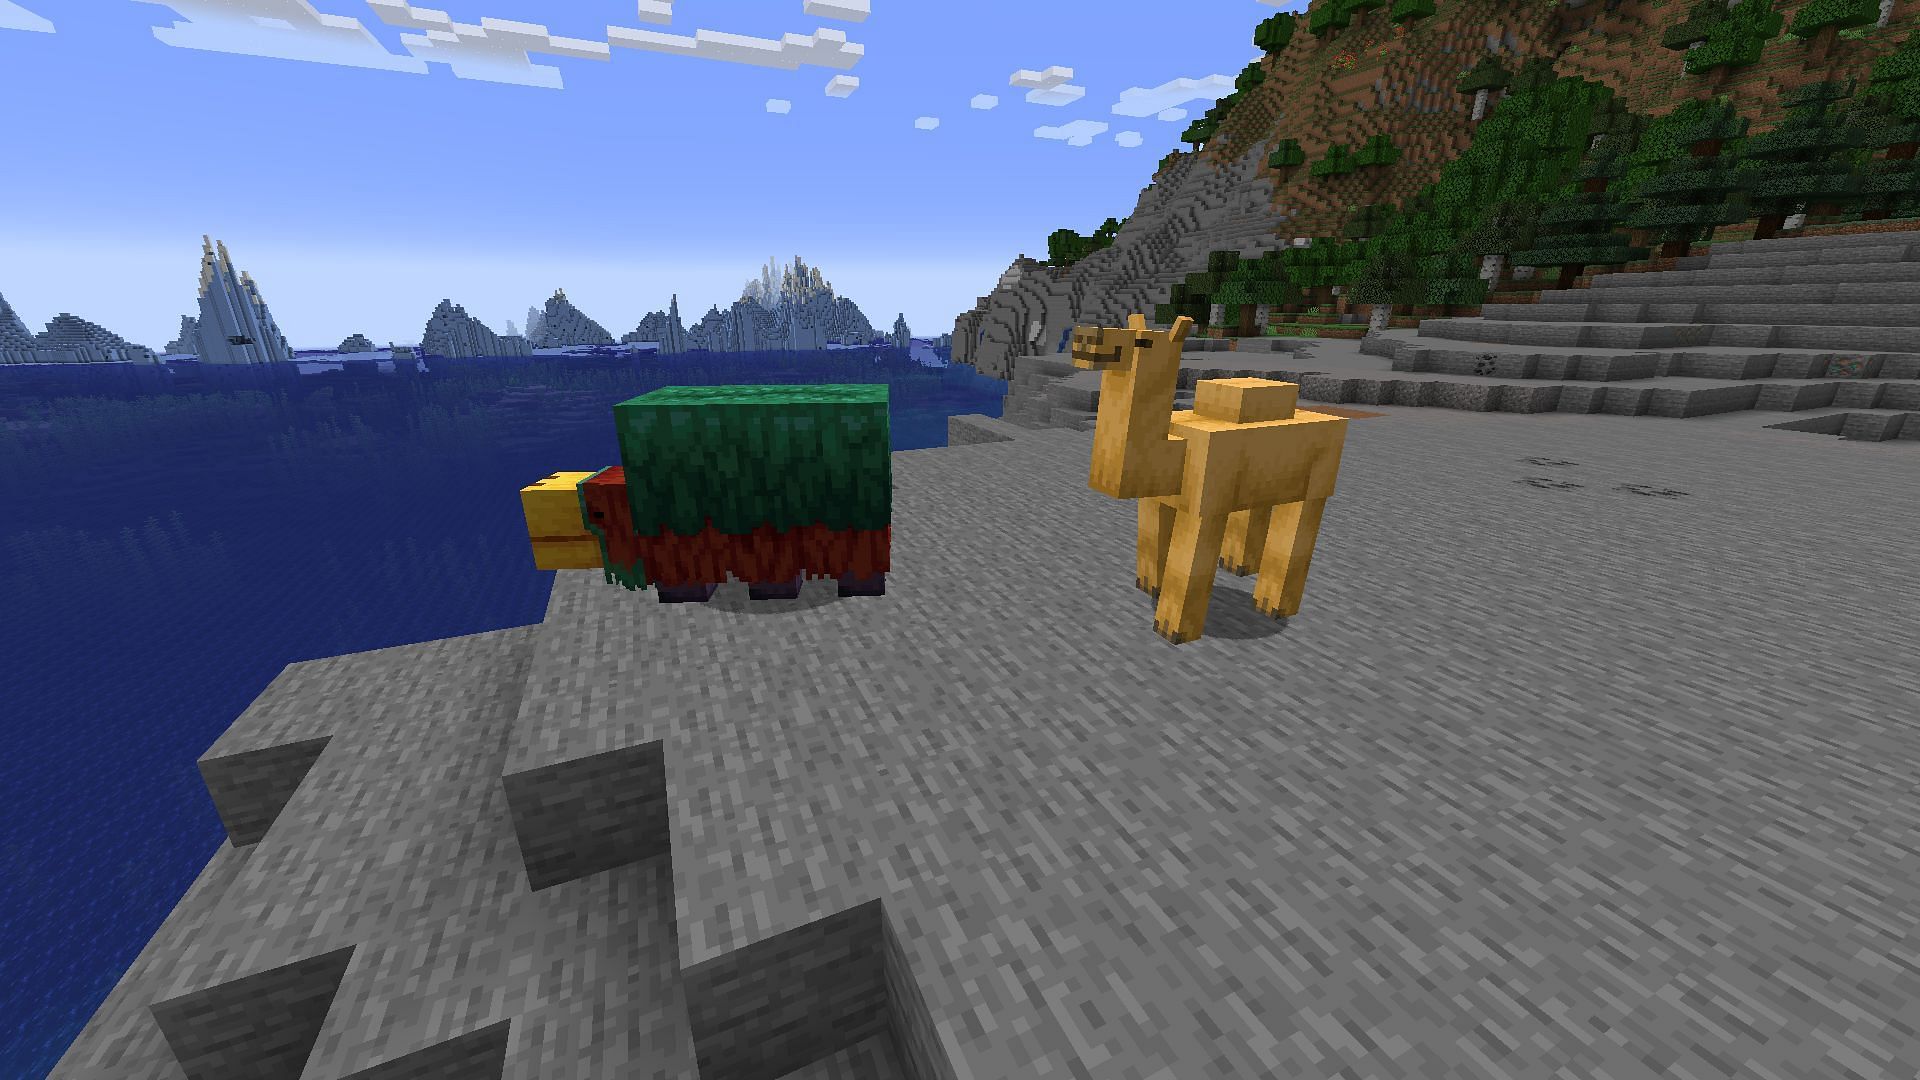 The sniffer and camel are the latest mobs to come to Minecraft in the 1.20 update (Image via Mojang)